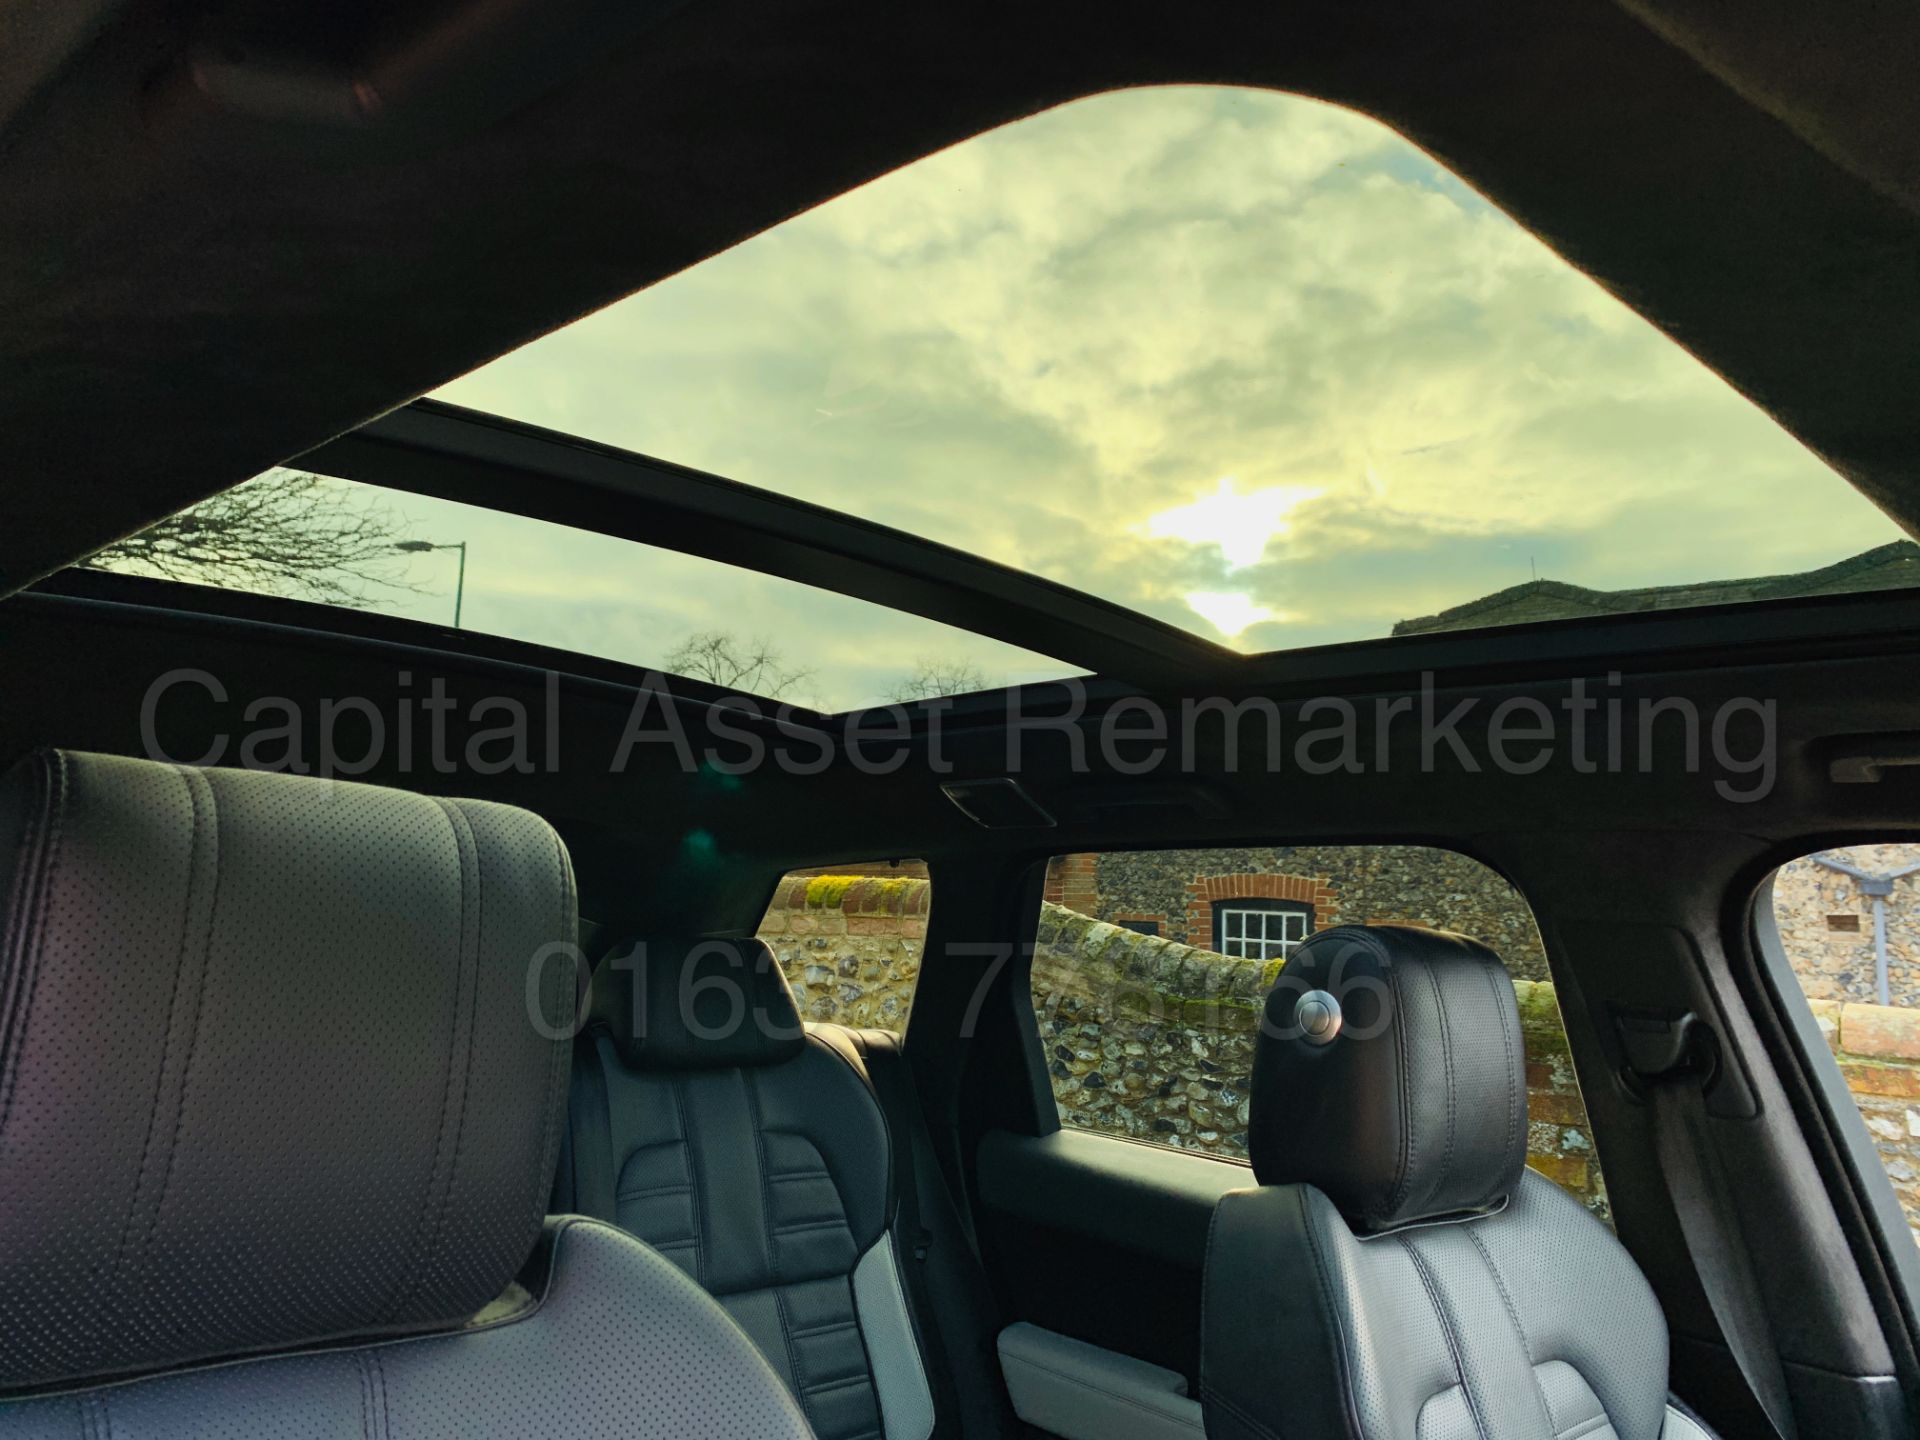 On Sale RANGE ROVER SPORT *AUTOBIOGRAPHY DYNAMIC* (2015 MODEL) '3.0 SDV6 - 8 SPEED AUTO' HIGE SPEC - Image 68 of 85